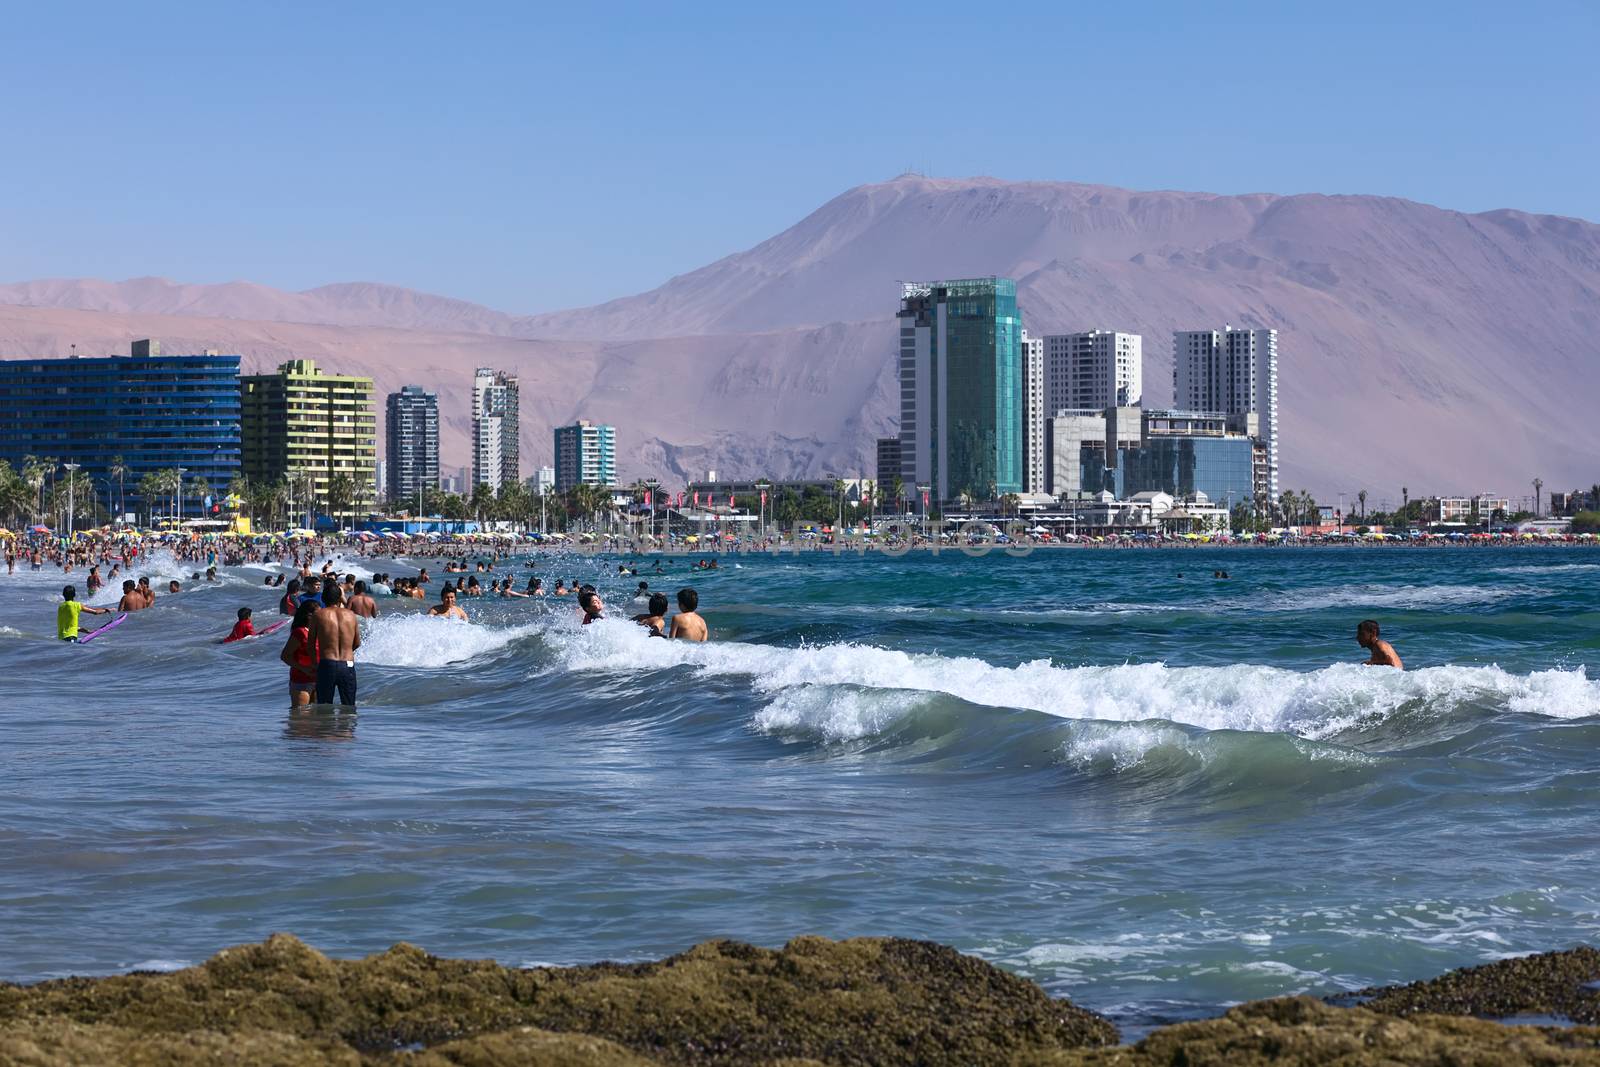 IQUIQUE, CHILE - FEBRUARY 10, 2015: Unidentified people bathing in the Pacific ocean at Cavancha beach on February 10, 2015 in Iquique, Chile. Iquique is a popular beach town and free port city in Northern Chile.